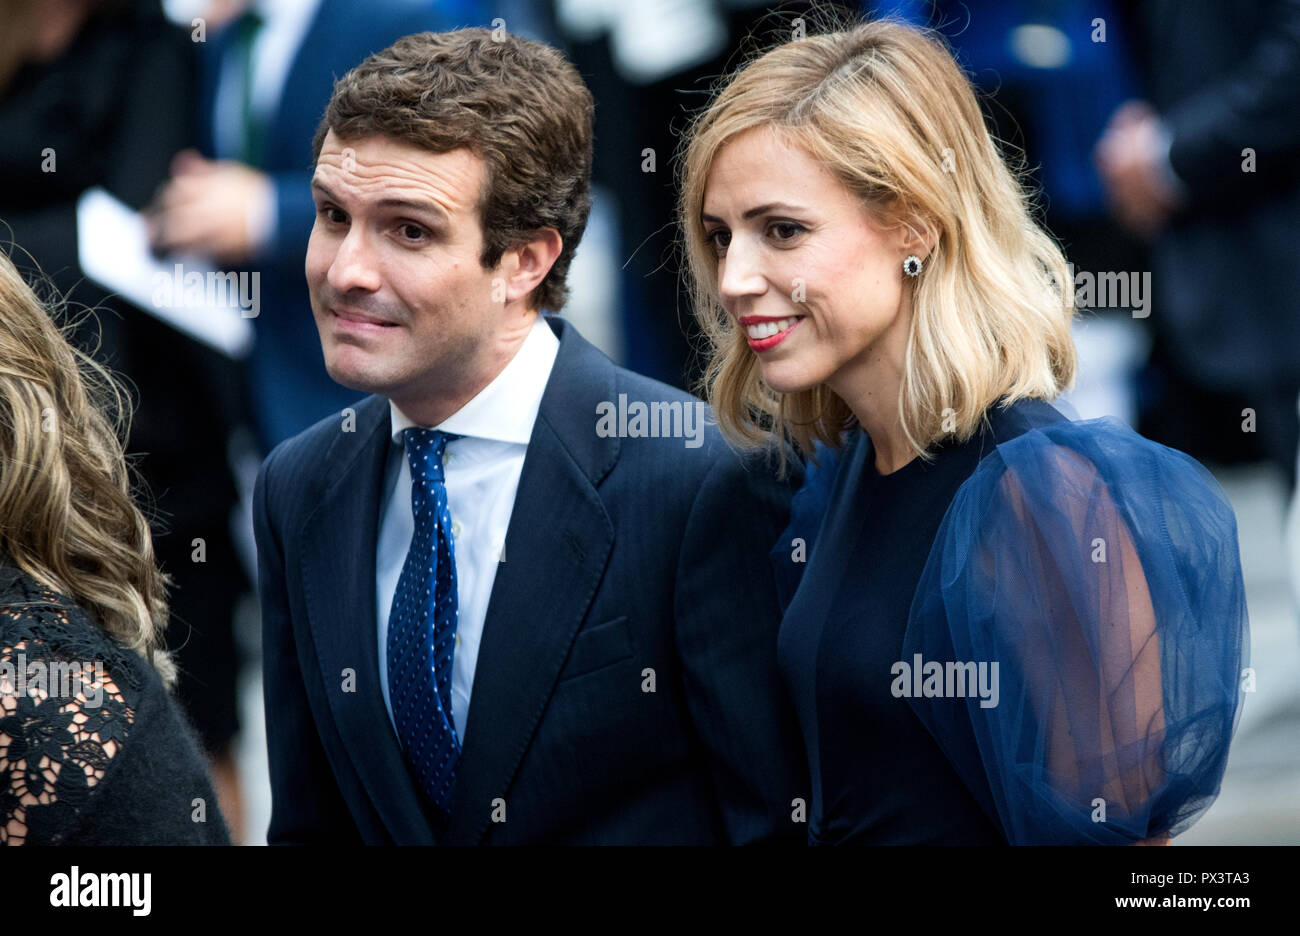 Oviedo, Spain. 19th October, 2018. Spanish politic and leader of the People's Party (PP), Pablo Casado, and his wife arrive to the ceremony of Princess of Asturias Awards at Campoamor Theatre on October 19, 2018 in Oviedo, Spain. ©David Gato/Alamy Live News Stock Photo